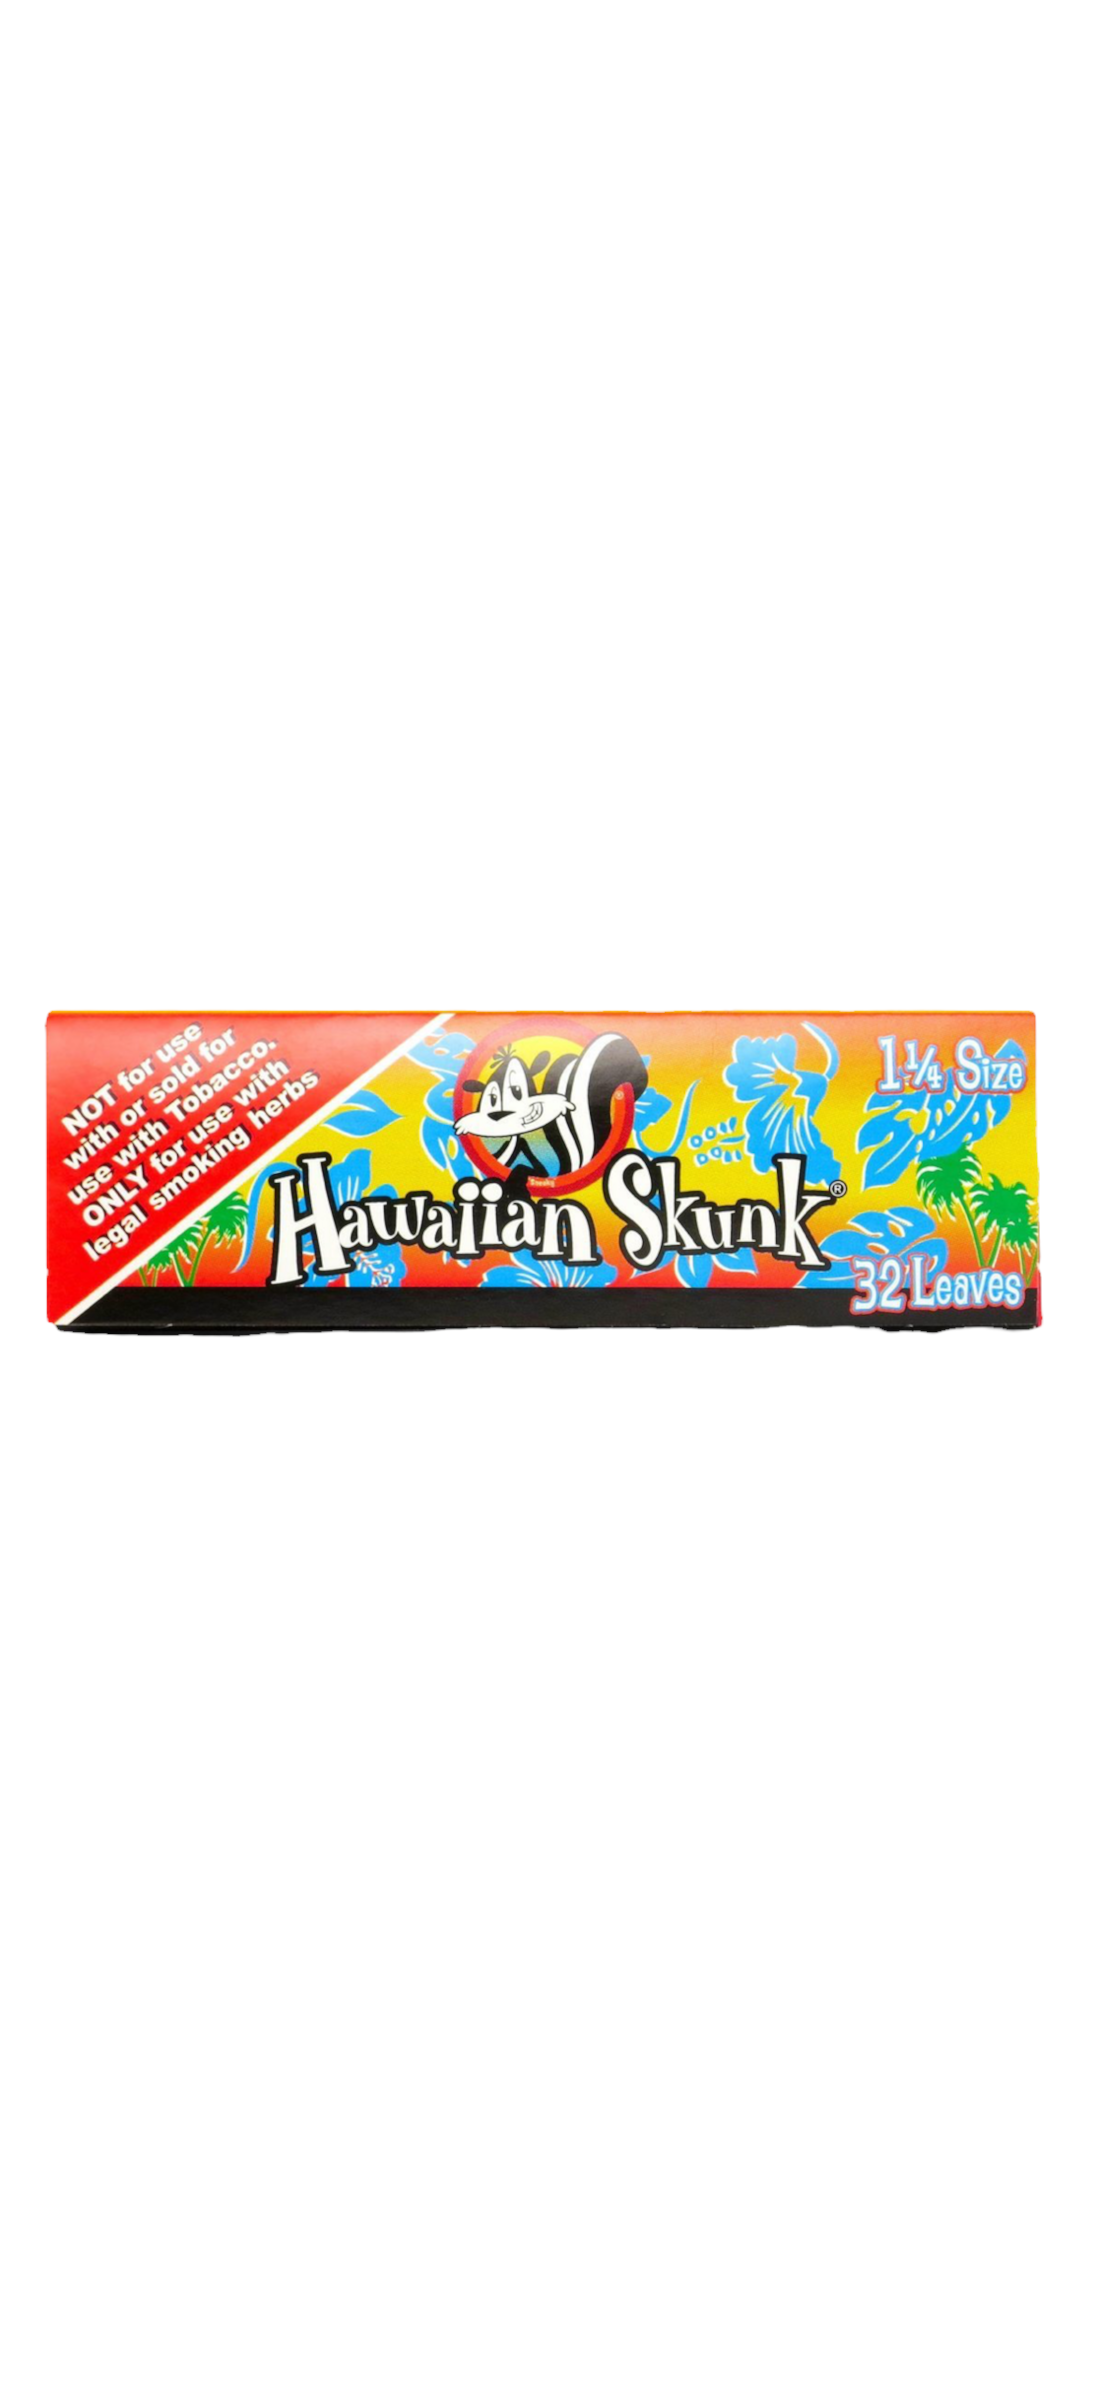 FLAVORED SKUNK PAPERS | 1 1/4 SIZE | 24 BOOKLETS